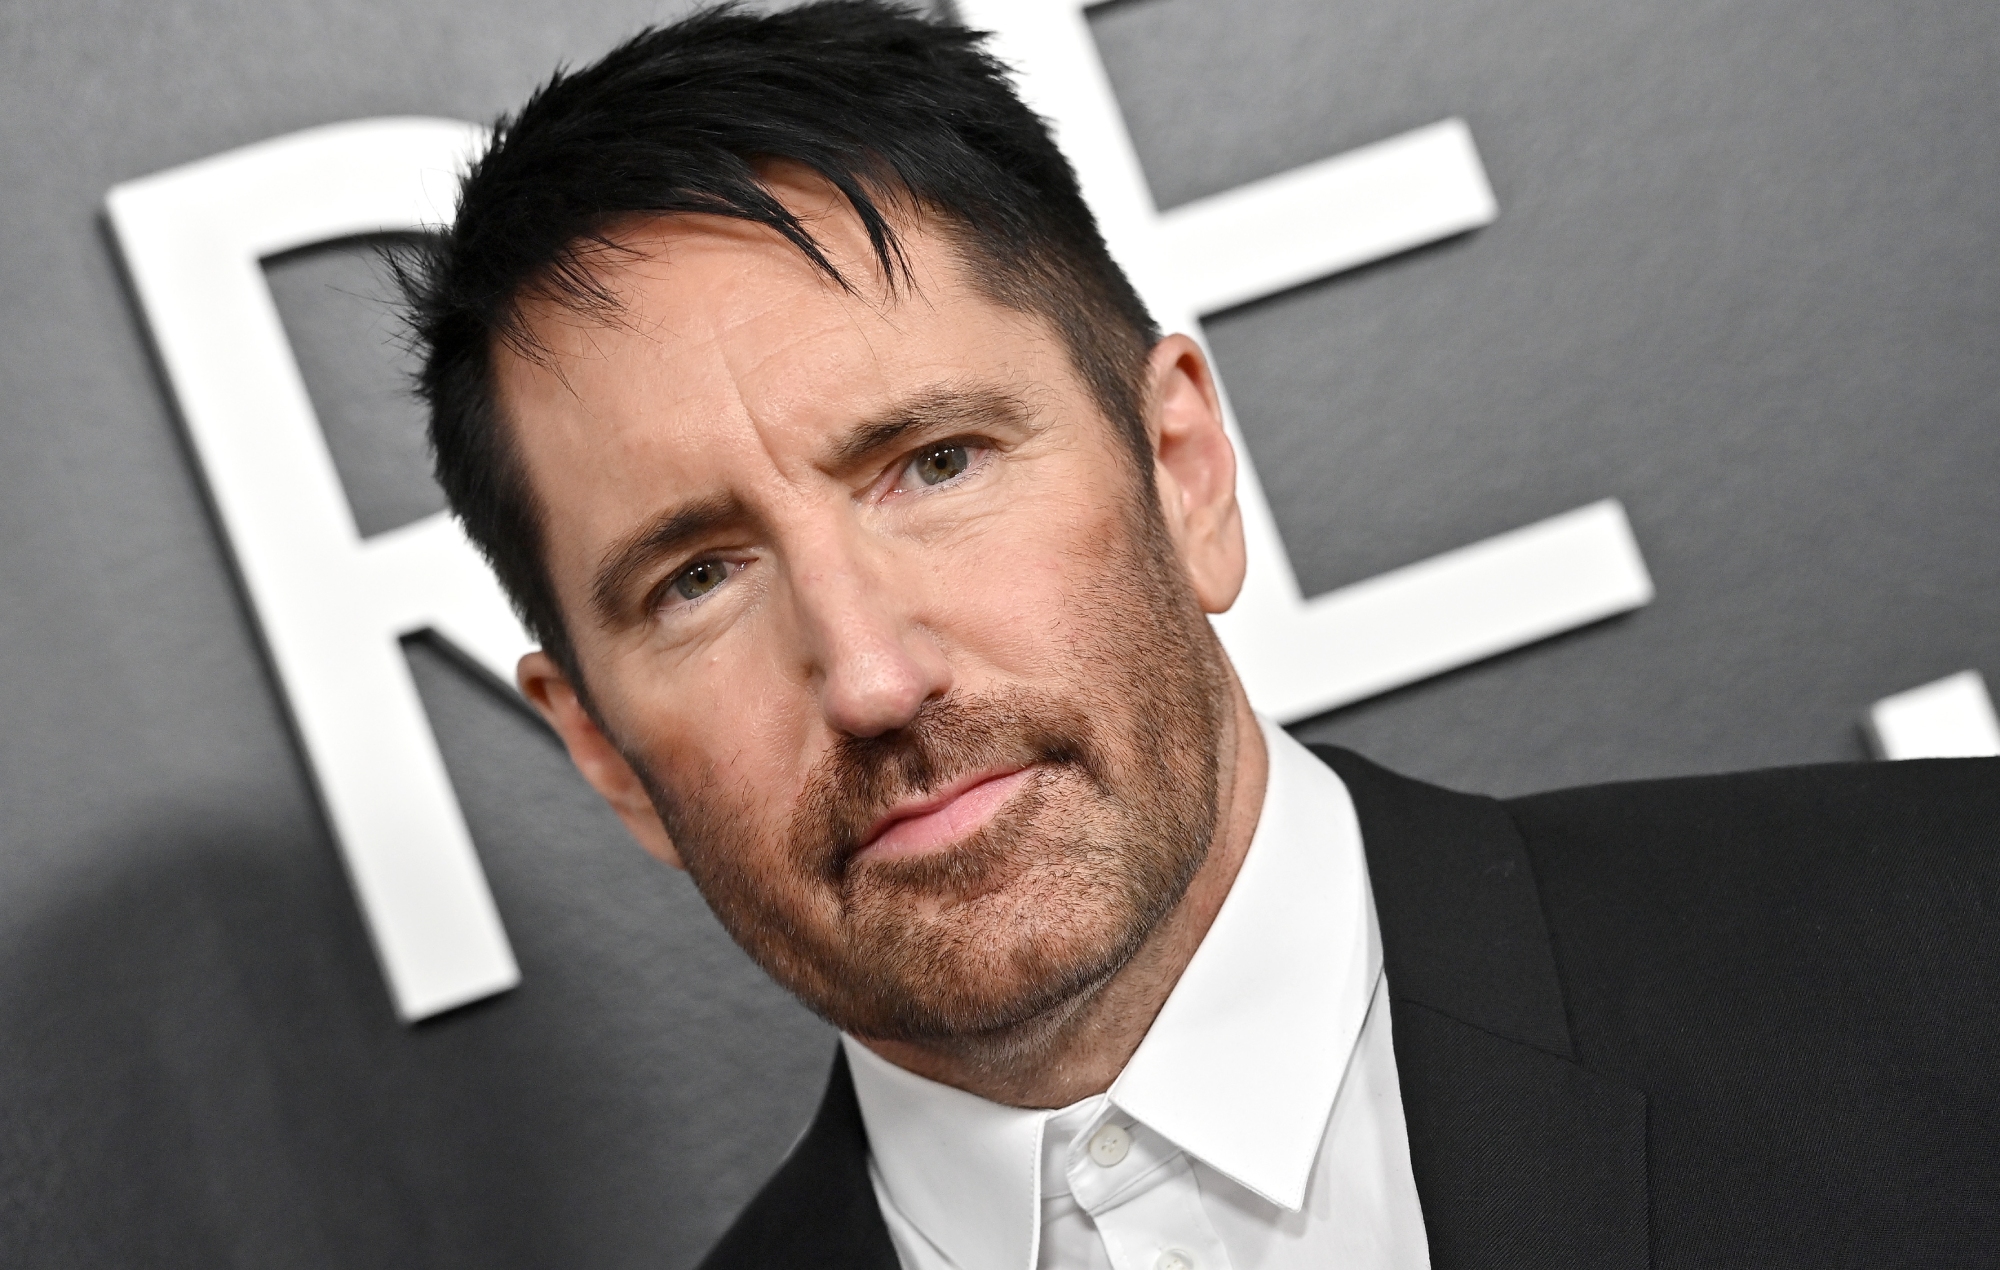 Trent Reznor (Photo by Axelle/Bauer-Griffin/FilmMagic)